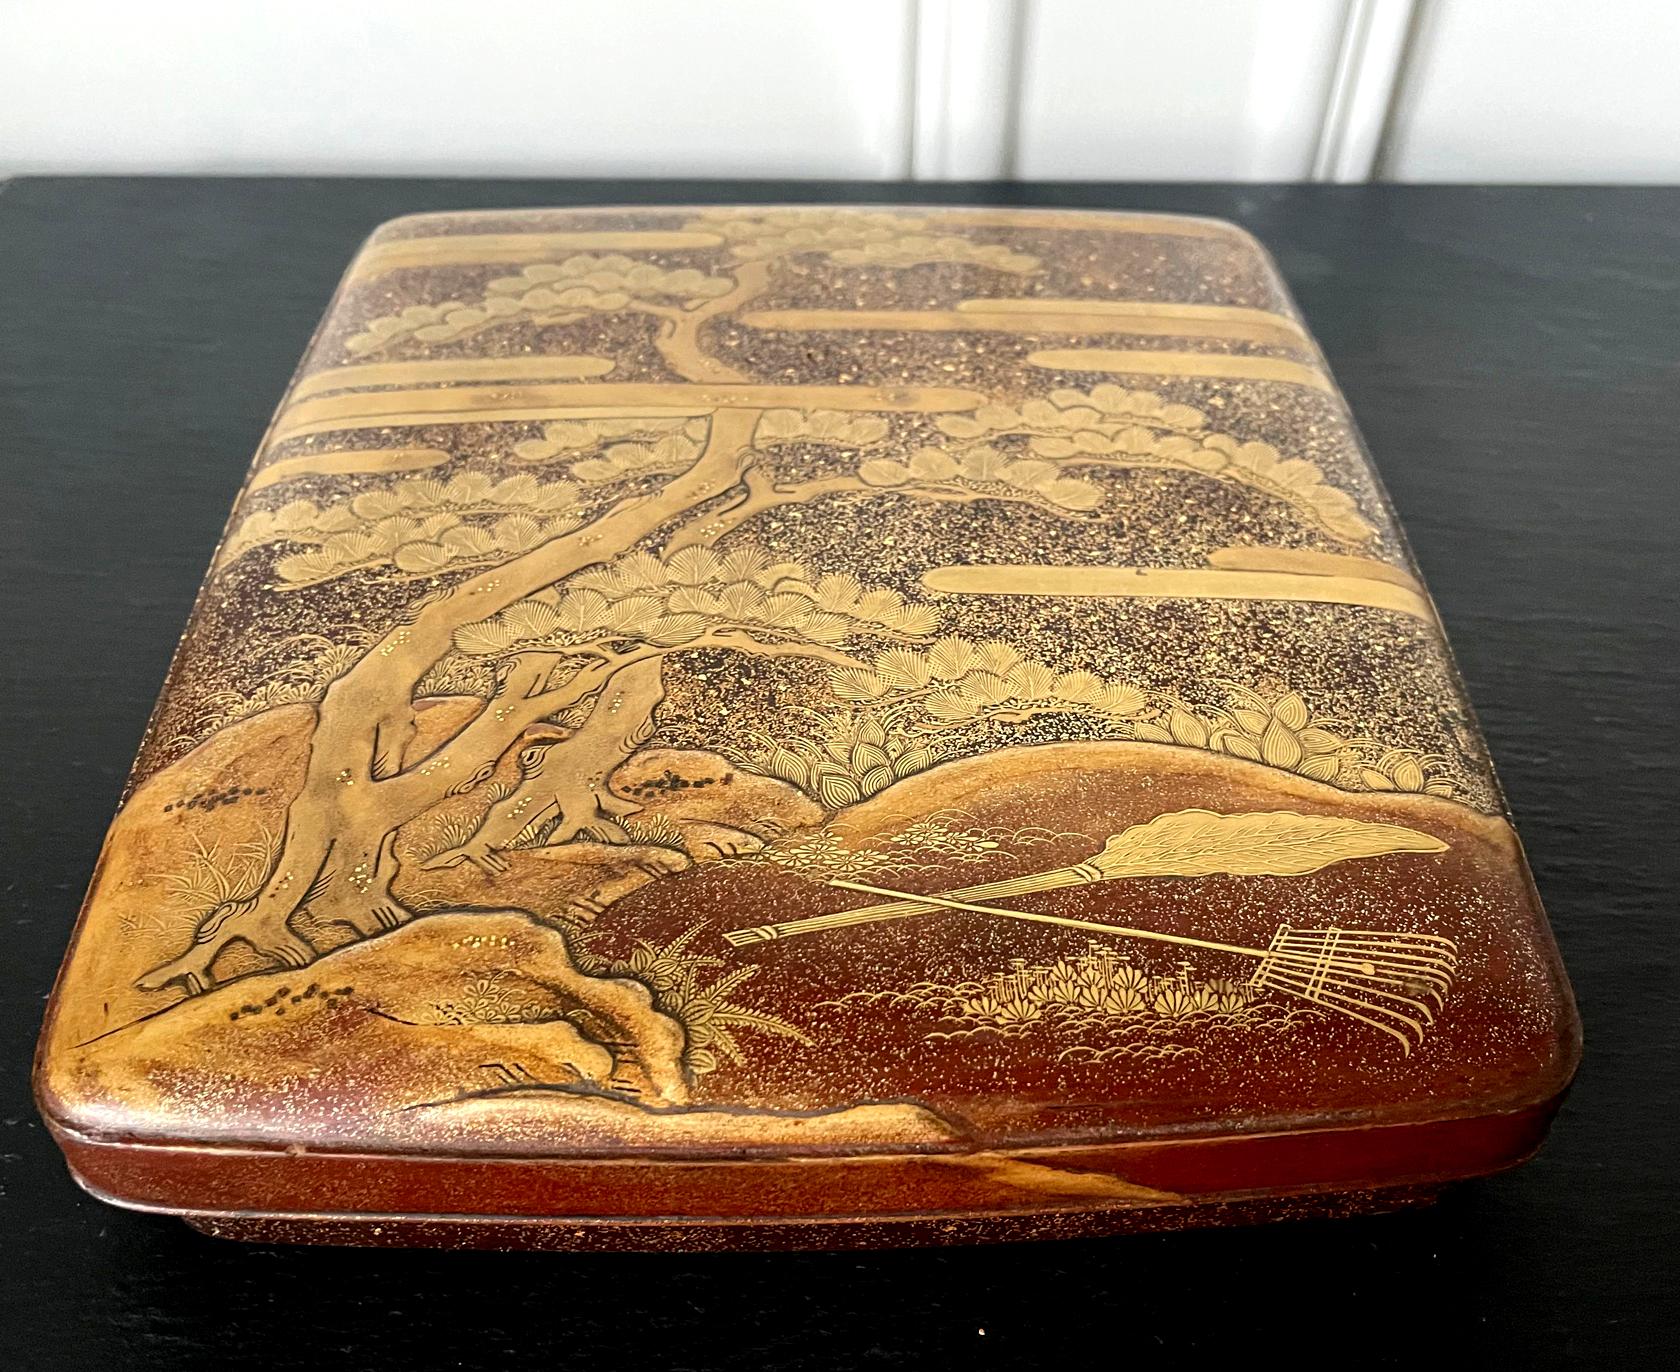 A Japanese ink stone box (known as Suzuribako) with exquisite maki-e decoration from Edo period (18th century-very early 19th century). The box features rounded exterior corner, two inner trays, one for holding brush pens, and the other for holding